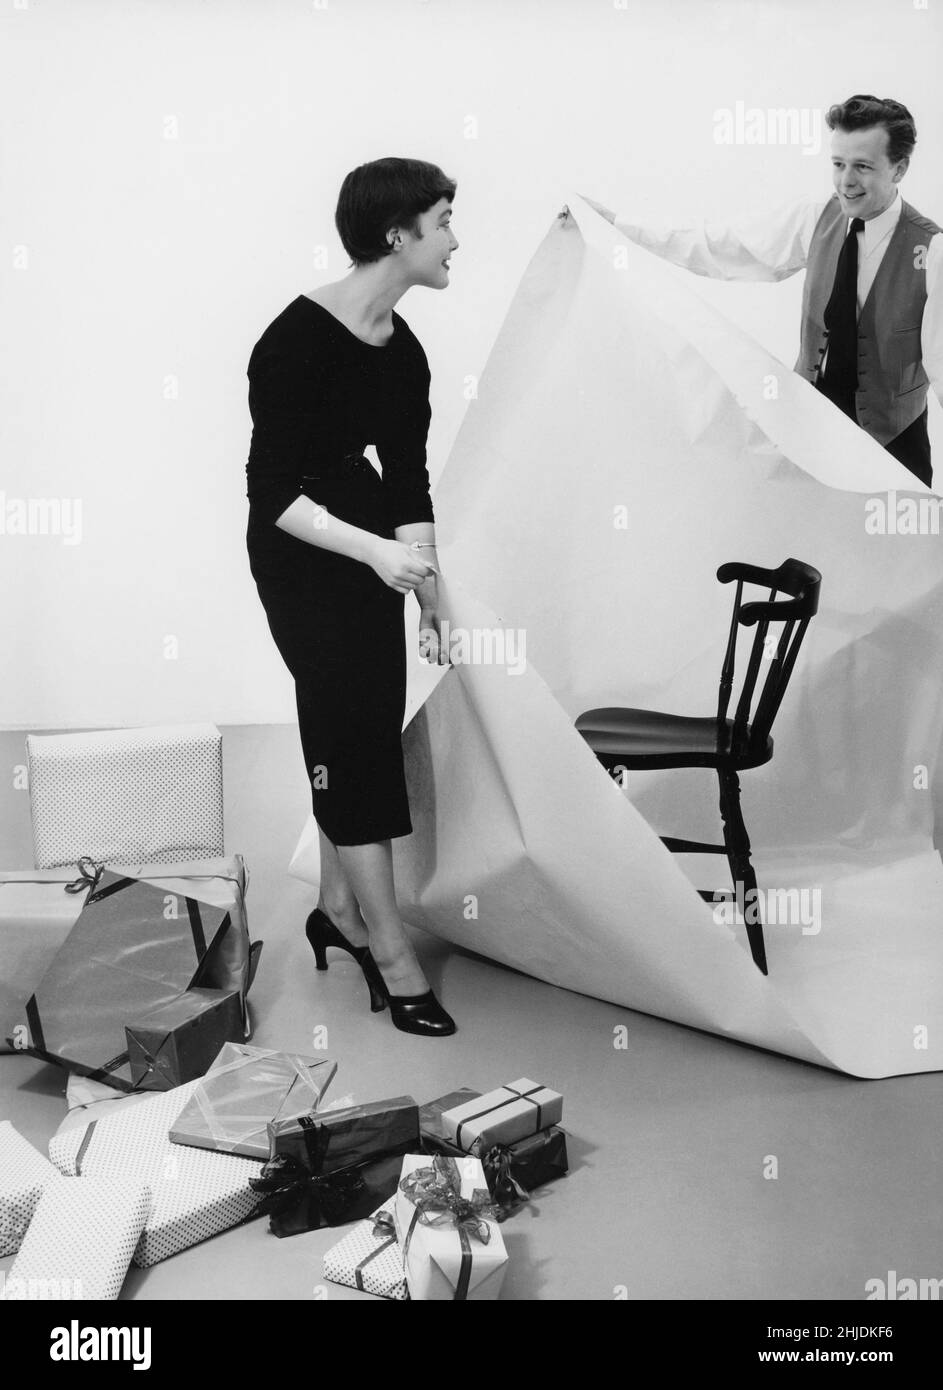 Christmas in the 1950s. A couple with christmas gifts visible tries their best at wrapping a chair in paper. 1953 Stock Photo